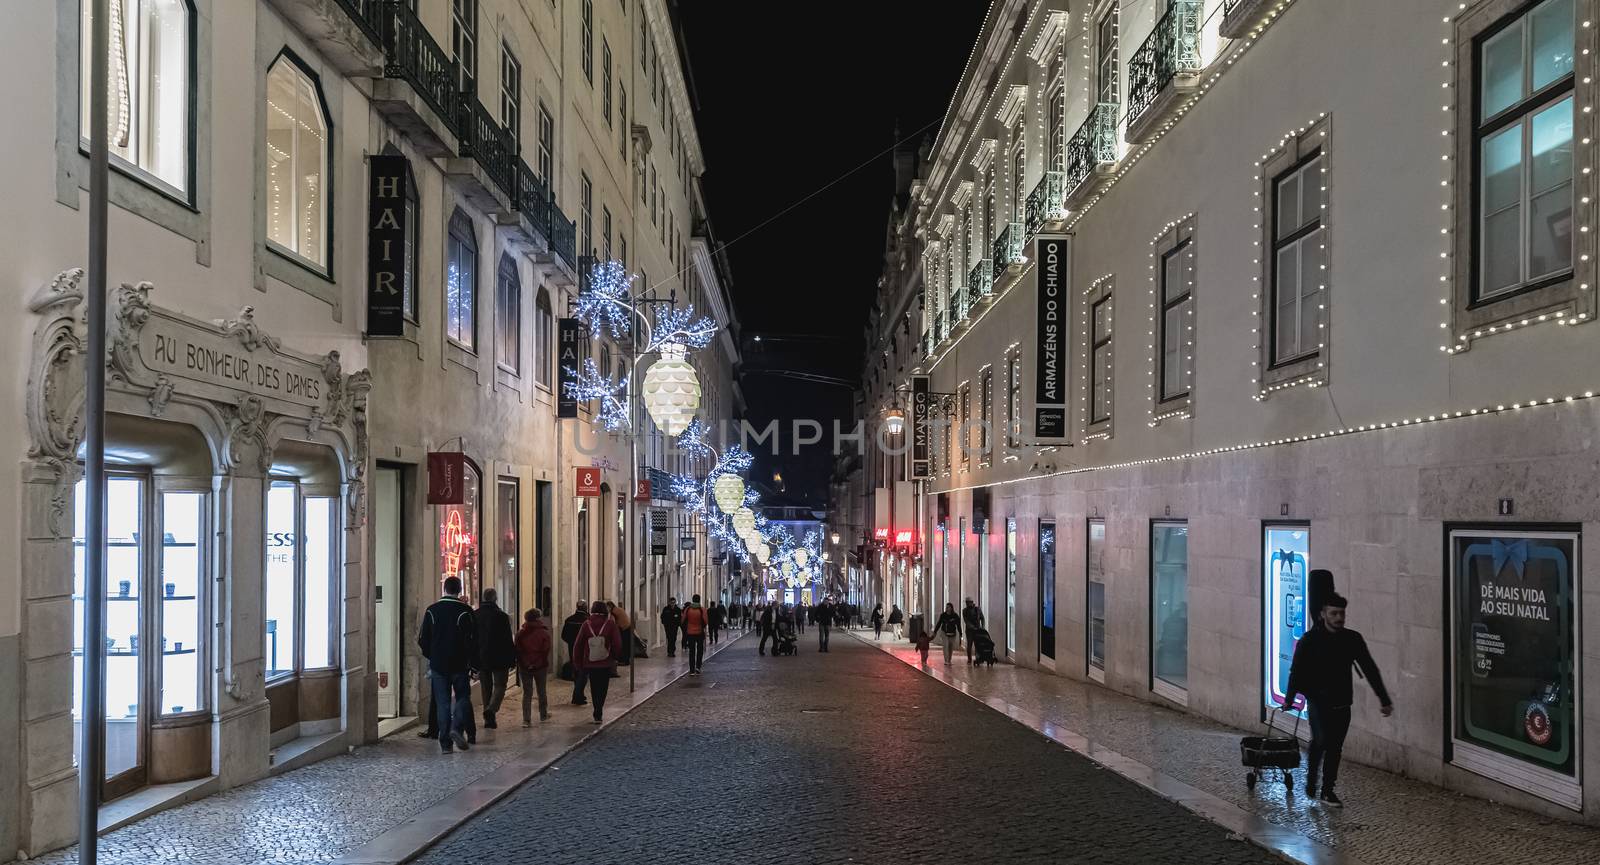 Street atmosphere in Lisbon at night decorated for Christmas by AtlanticEUROSTOXX